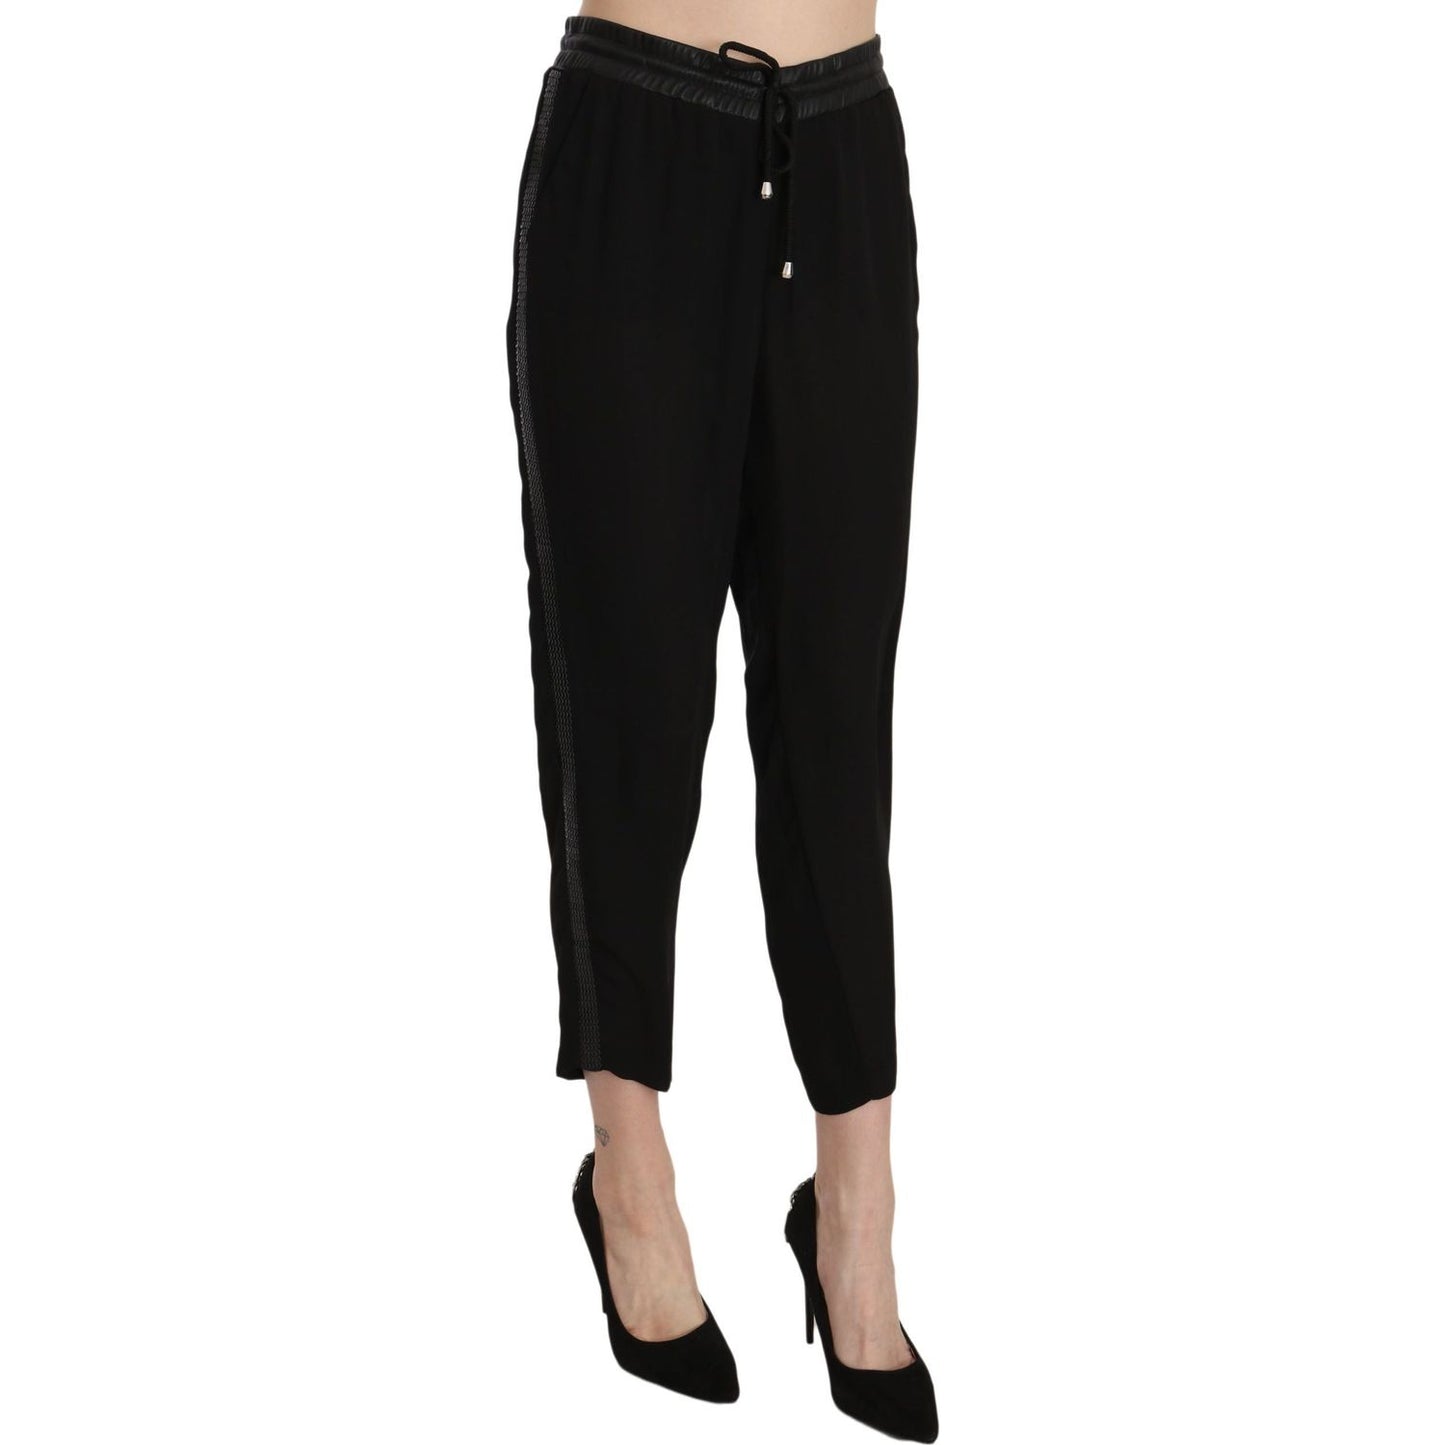 Guess Chic High Waist Cropped Pants in Elegant Black Jeans & Pants black-polyester-high-waist-cropped-trousers-pants